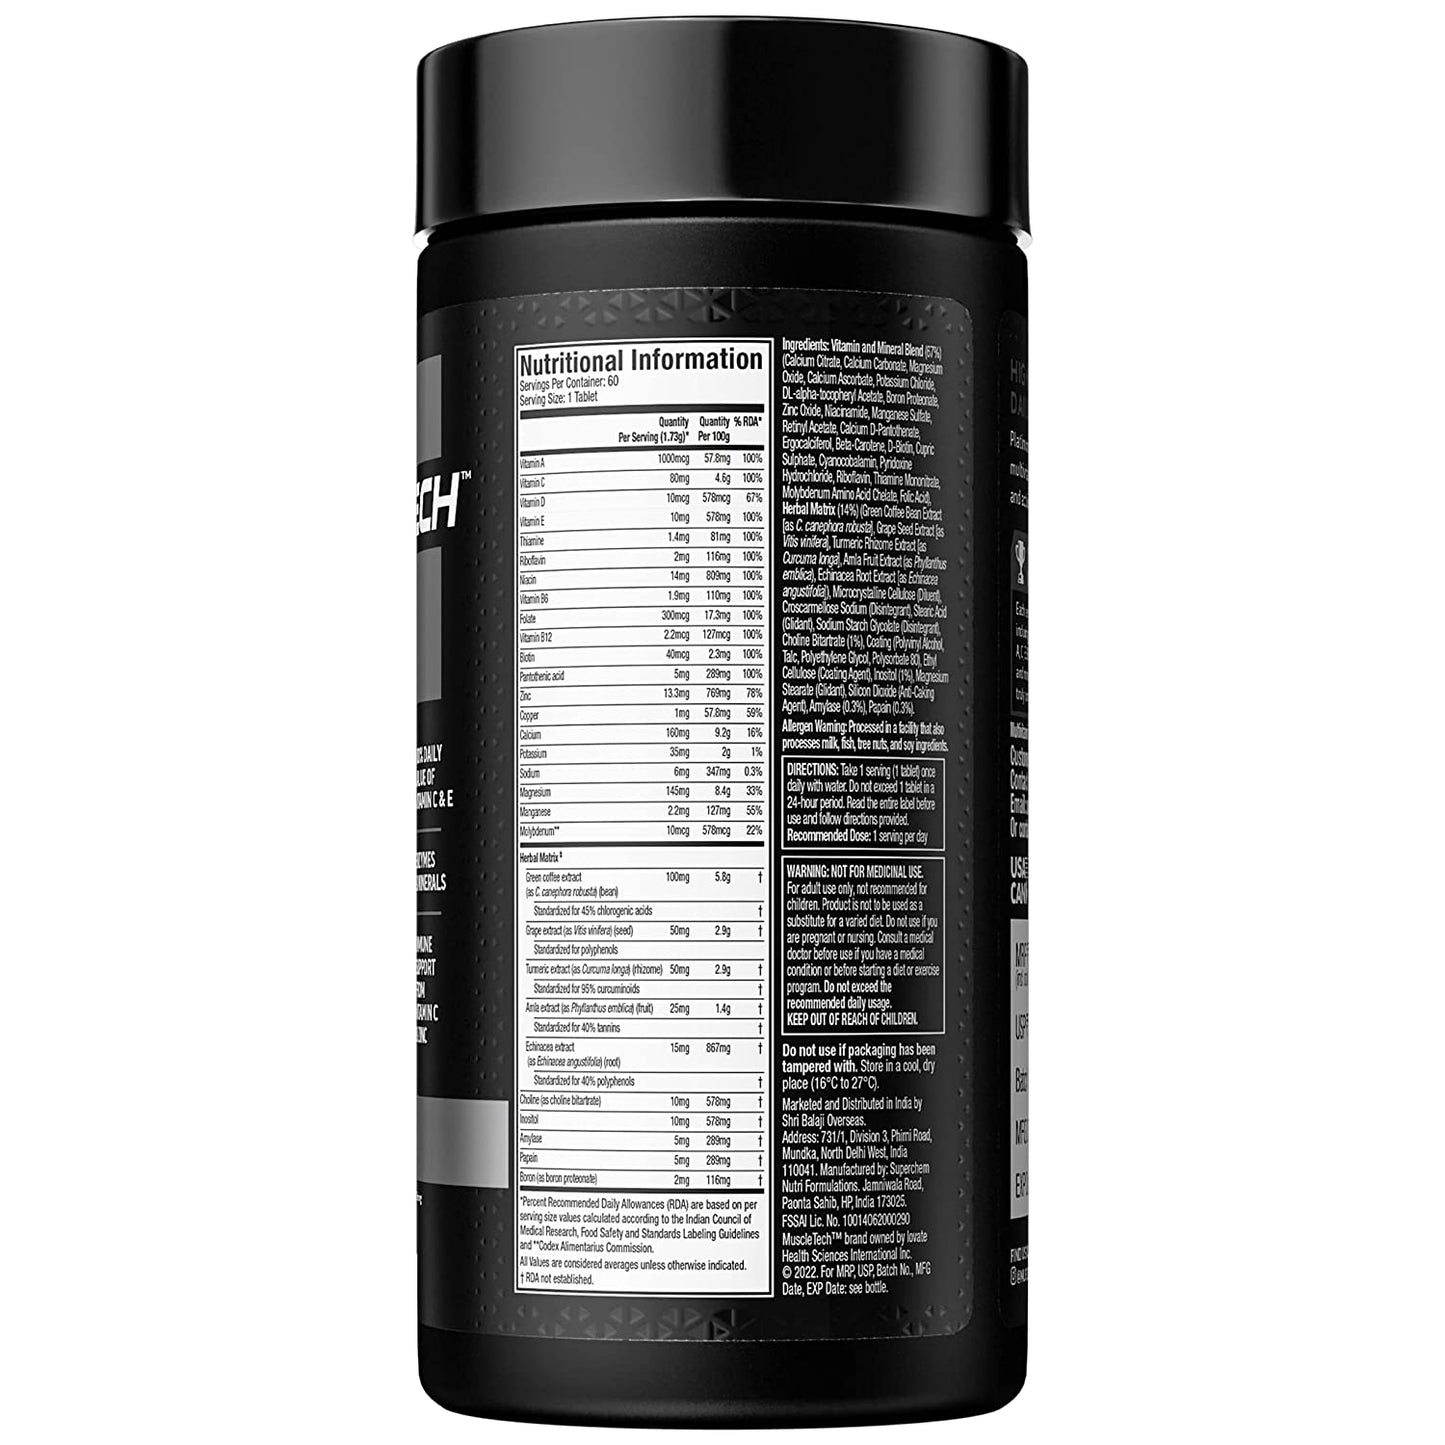 Muscletech Fish Oil 100 Softgels with Multivitamin 60 tablets